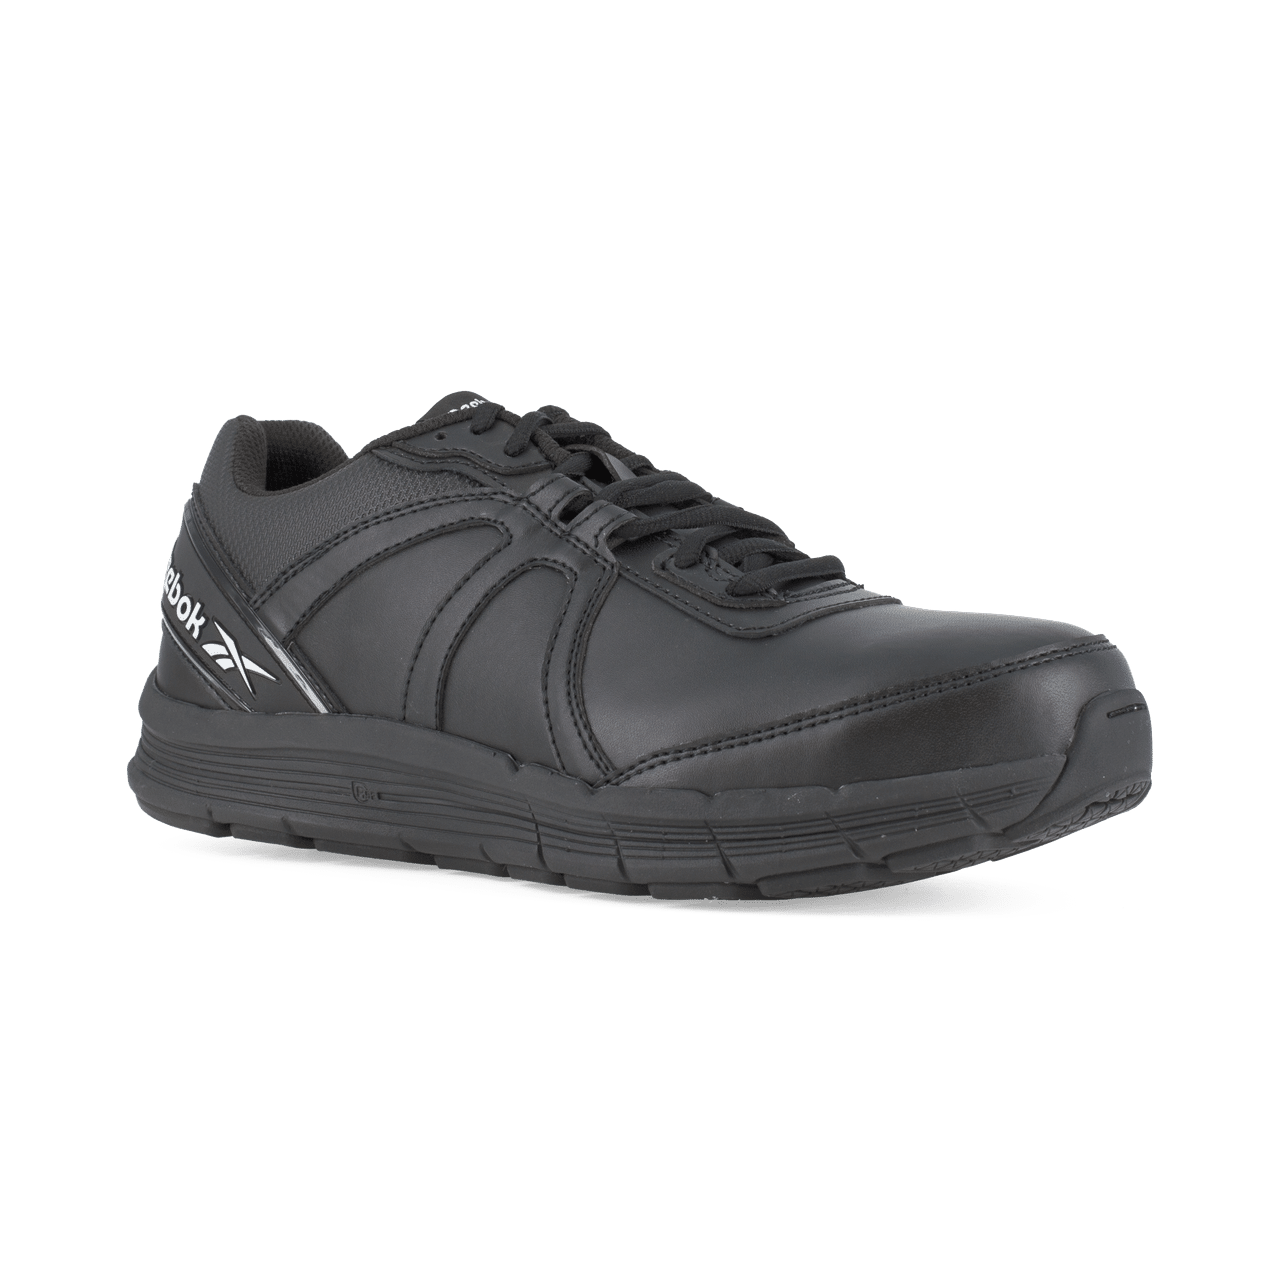 Reebok, Athletic Shoes, Sneakers & Apparel, Zappos